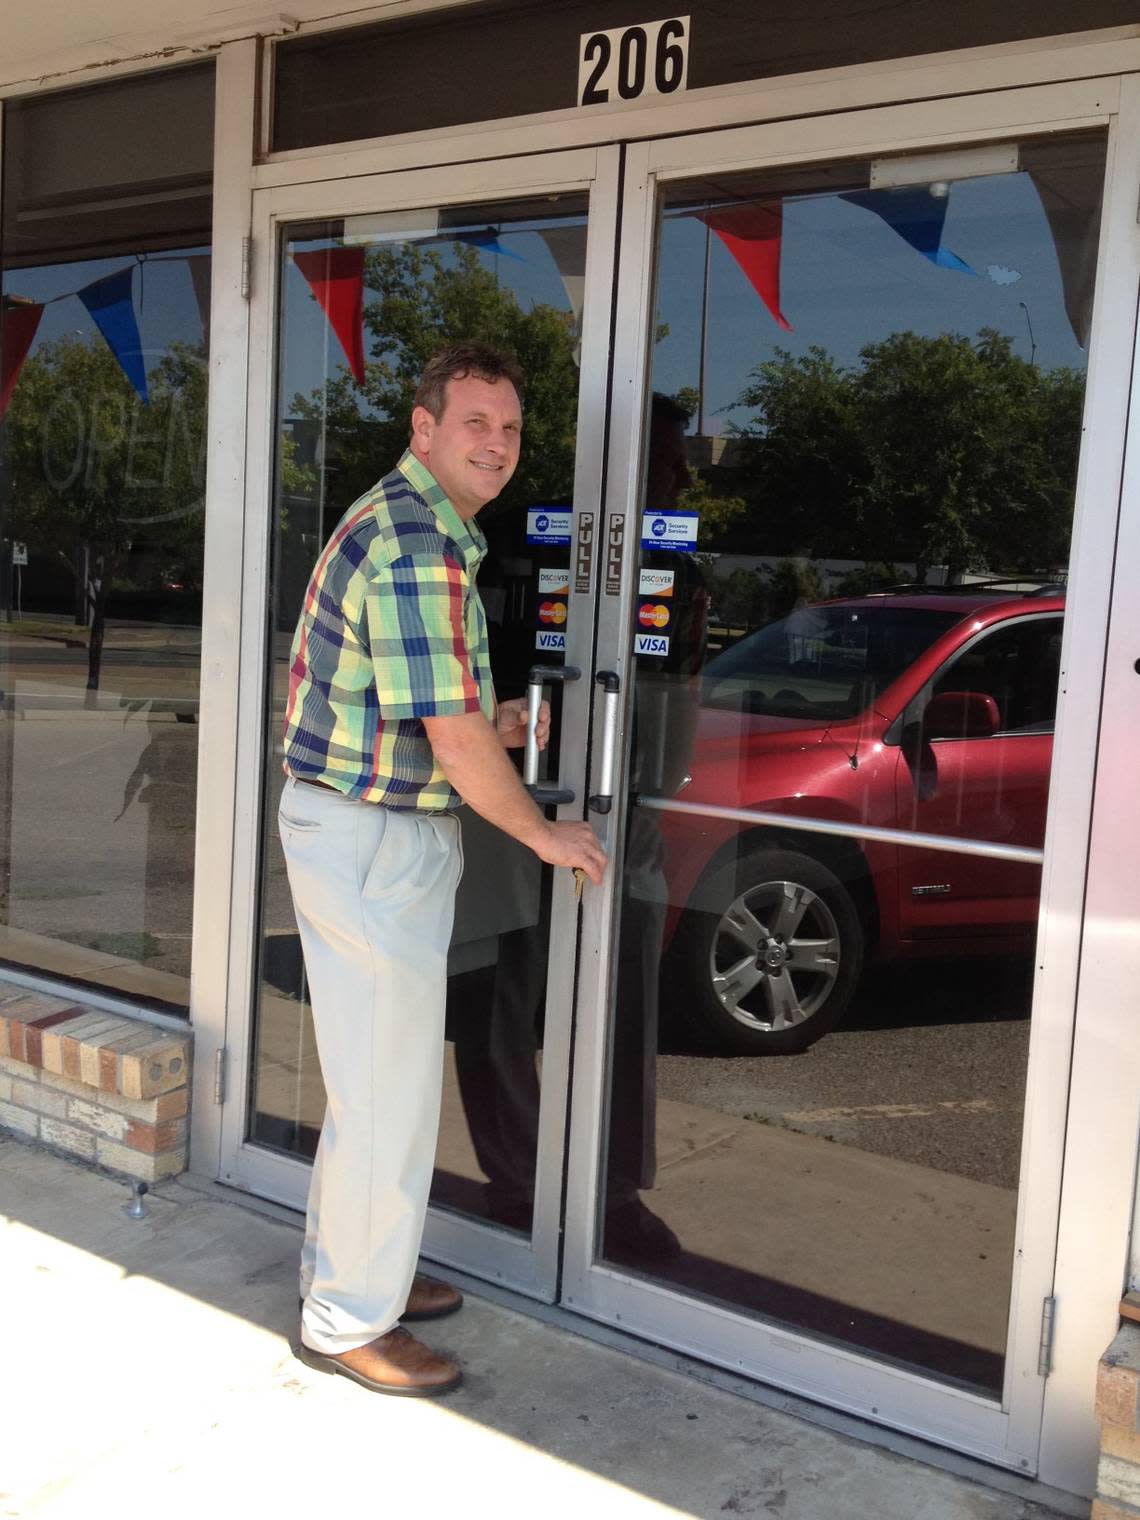 Patrick Shibley is pictured in 2012, just after he took over the lease for the space at 206 E. Kellogg that would become Doo-Dah Diner.